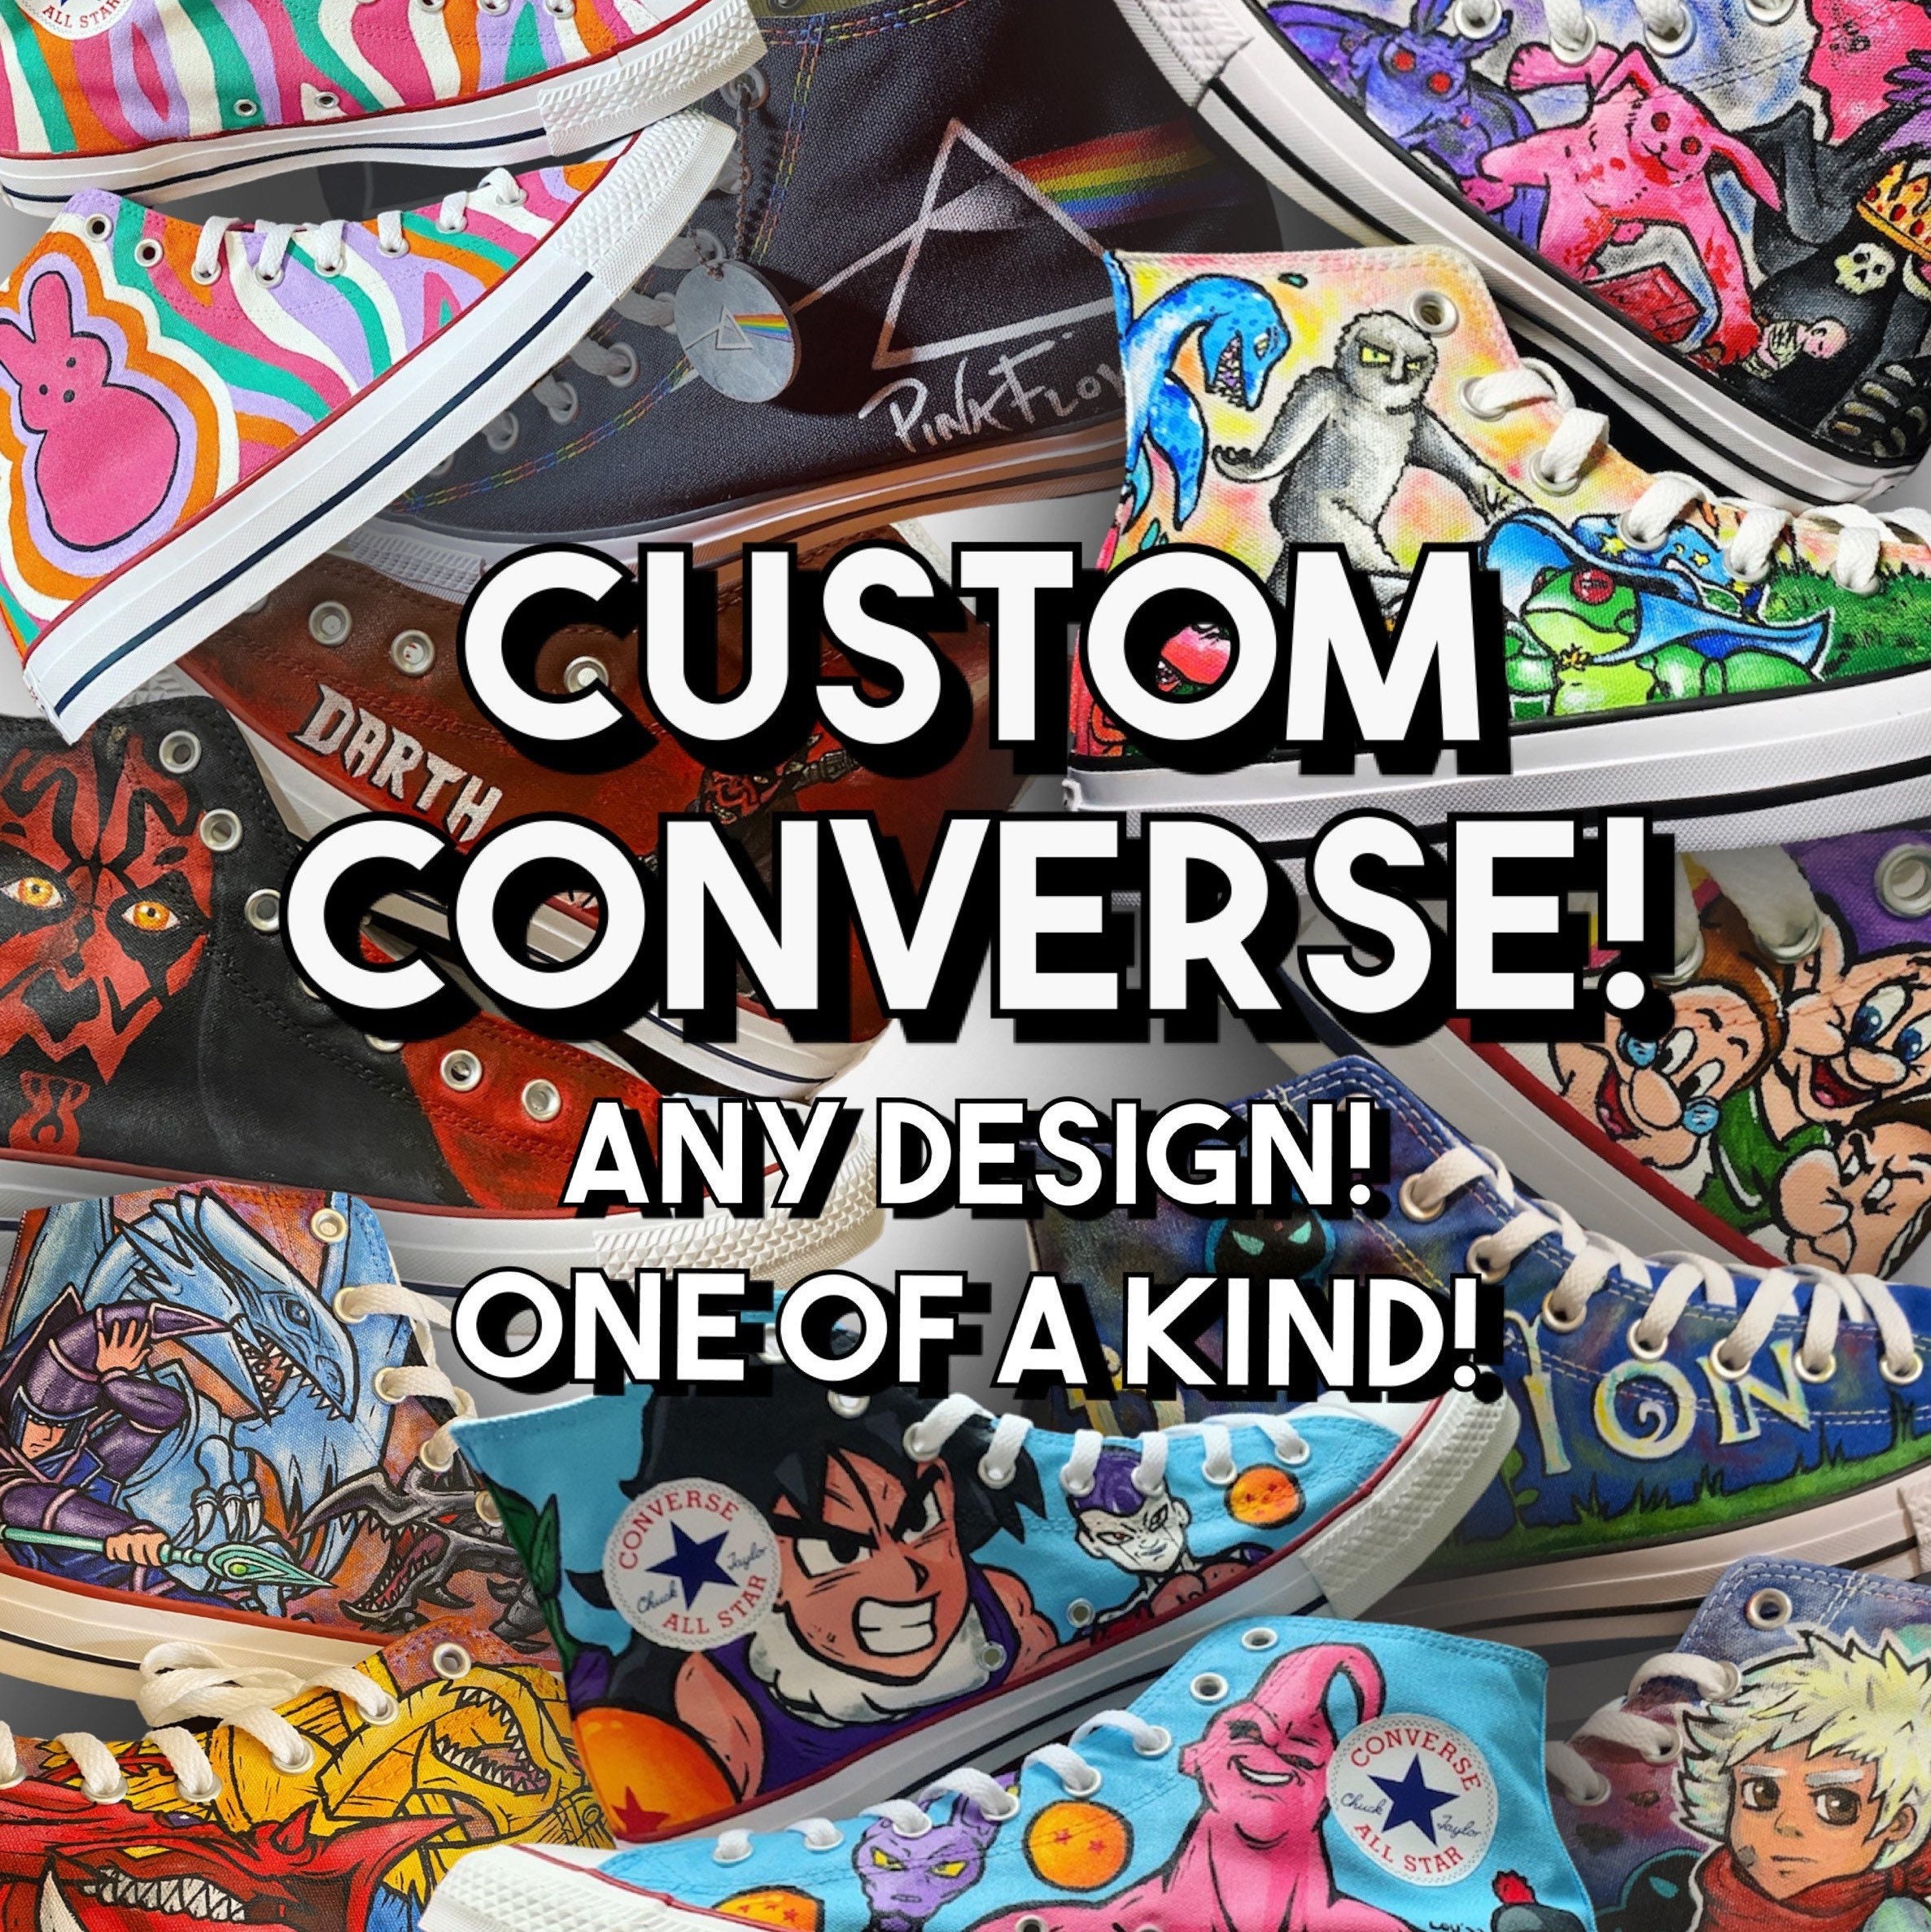 Custom Converse Shoes Hand Painted - Etsy